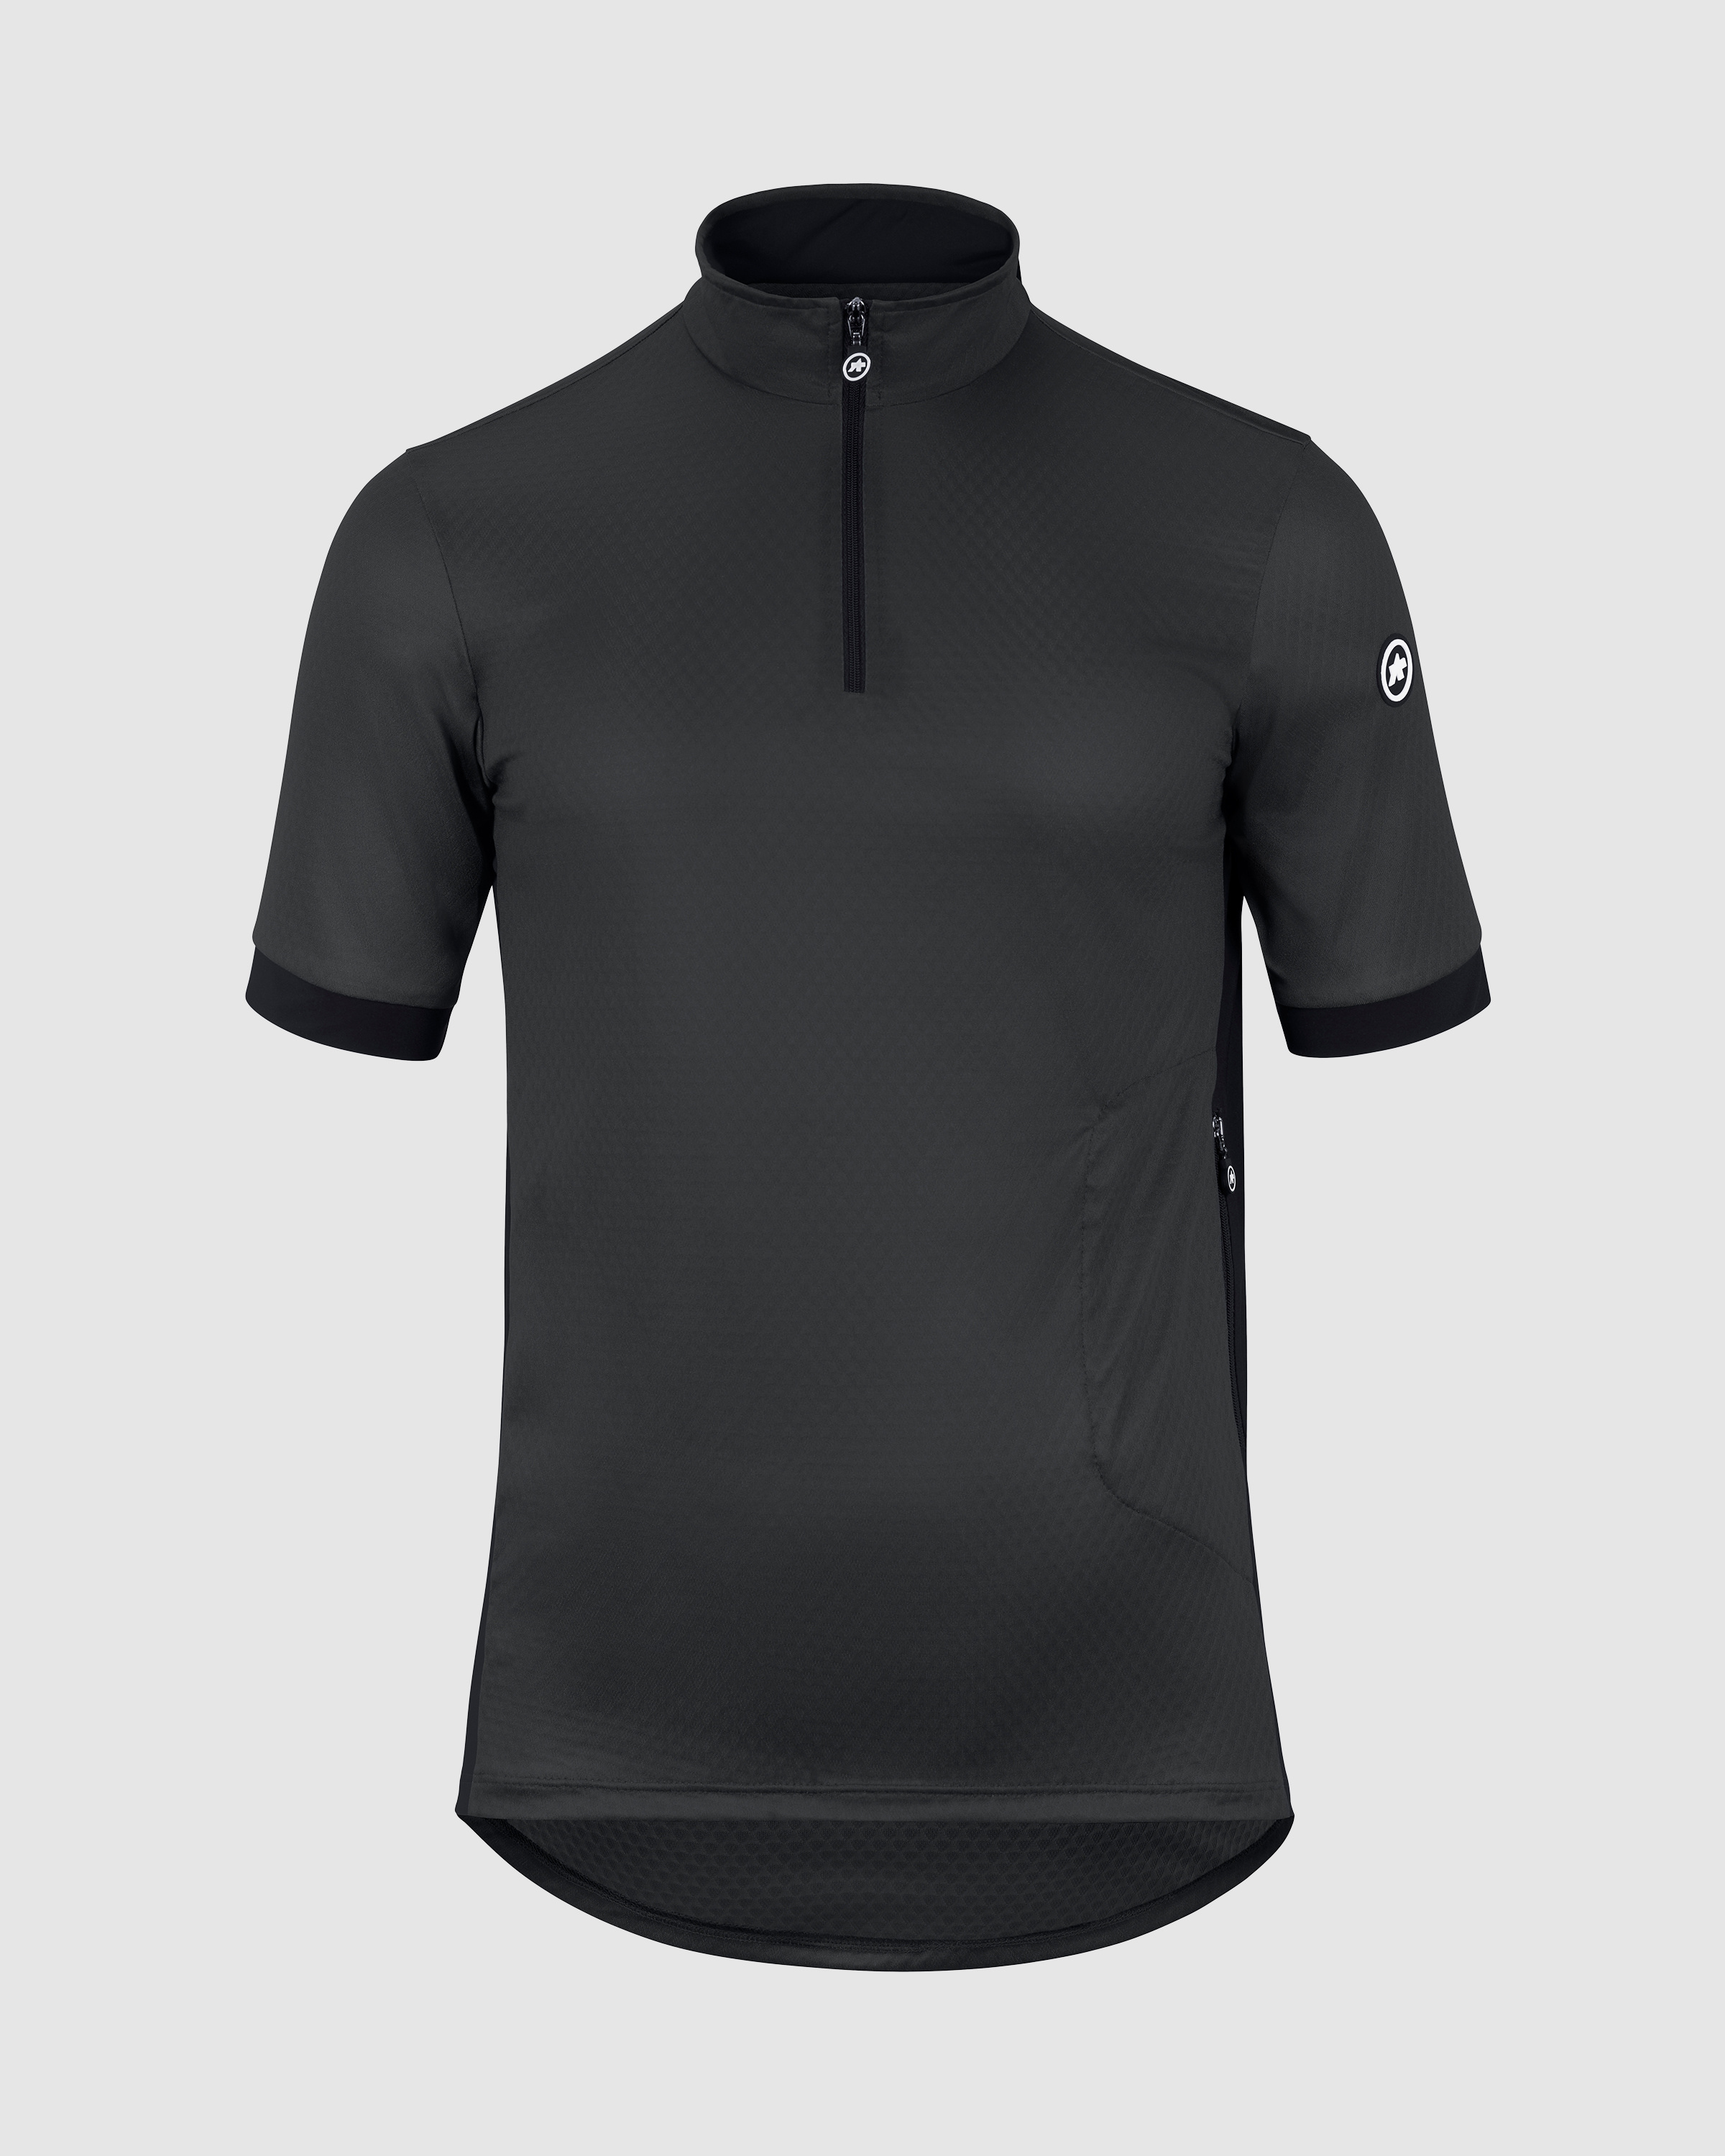 MILLE GTC Jersey C2 - ASSOS Of Switzerland - Official Outlet